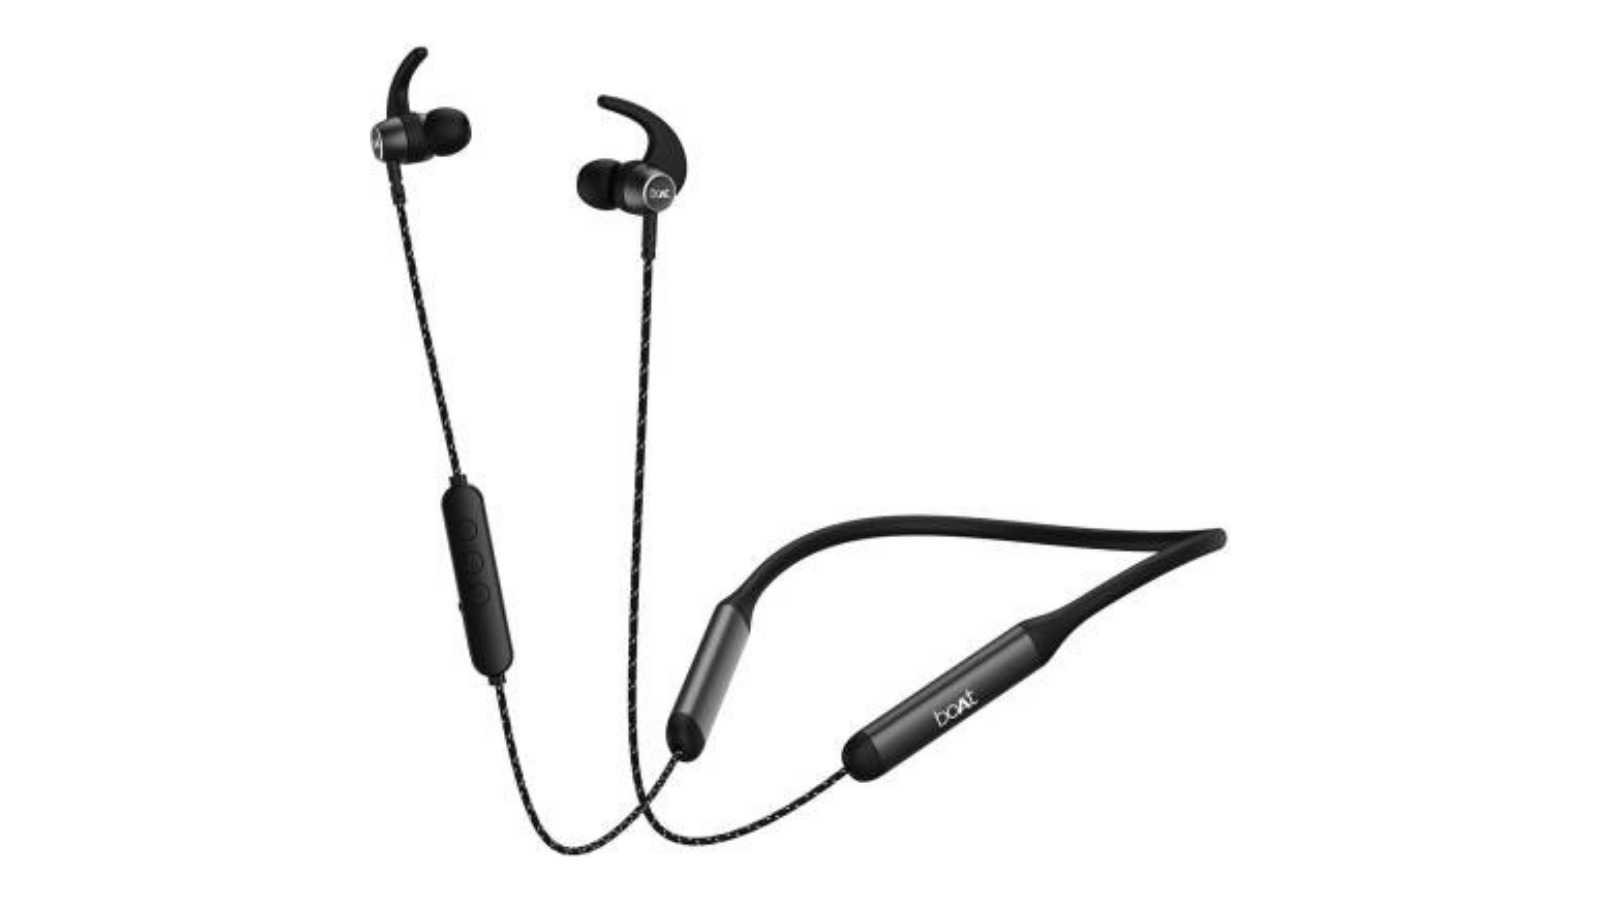 boAt Rockerz 333 Pro Wireless Neckband with 60 hours battery life launched: Price, Specifications